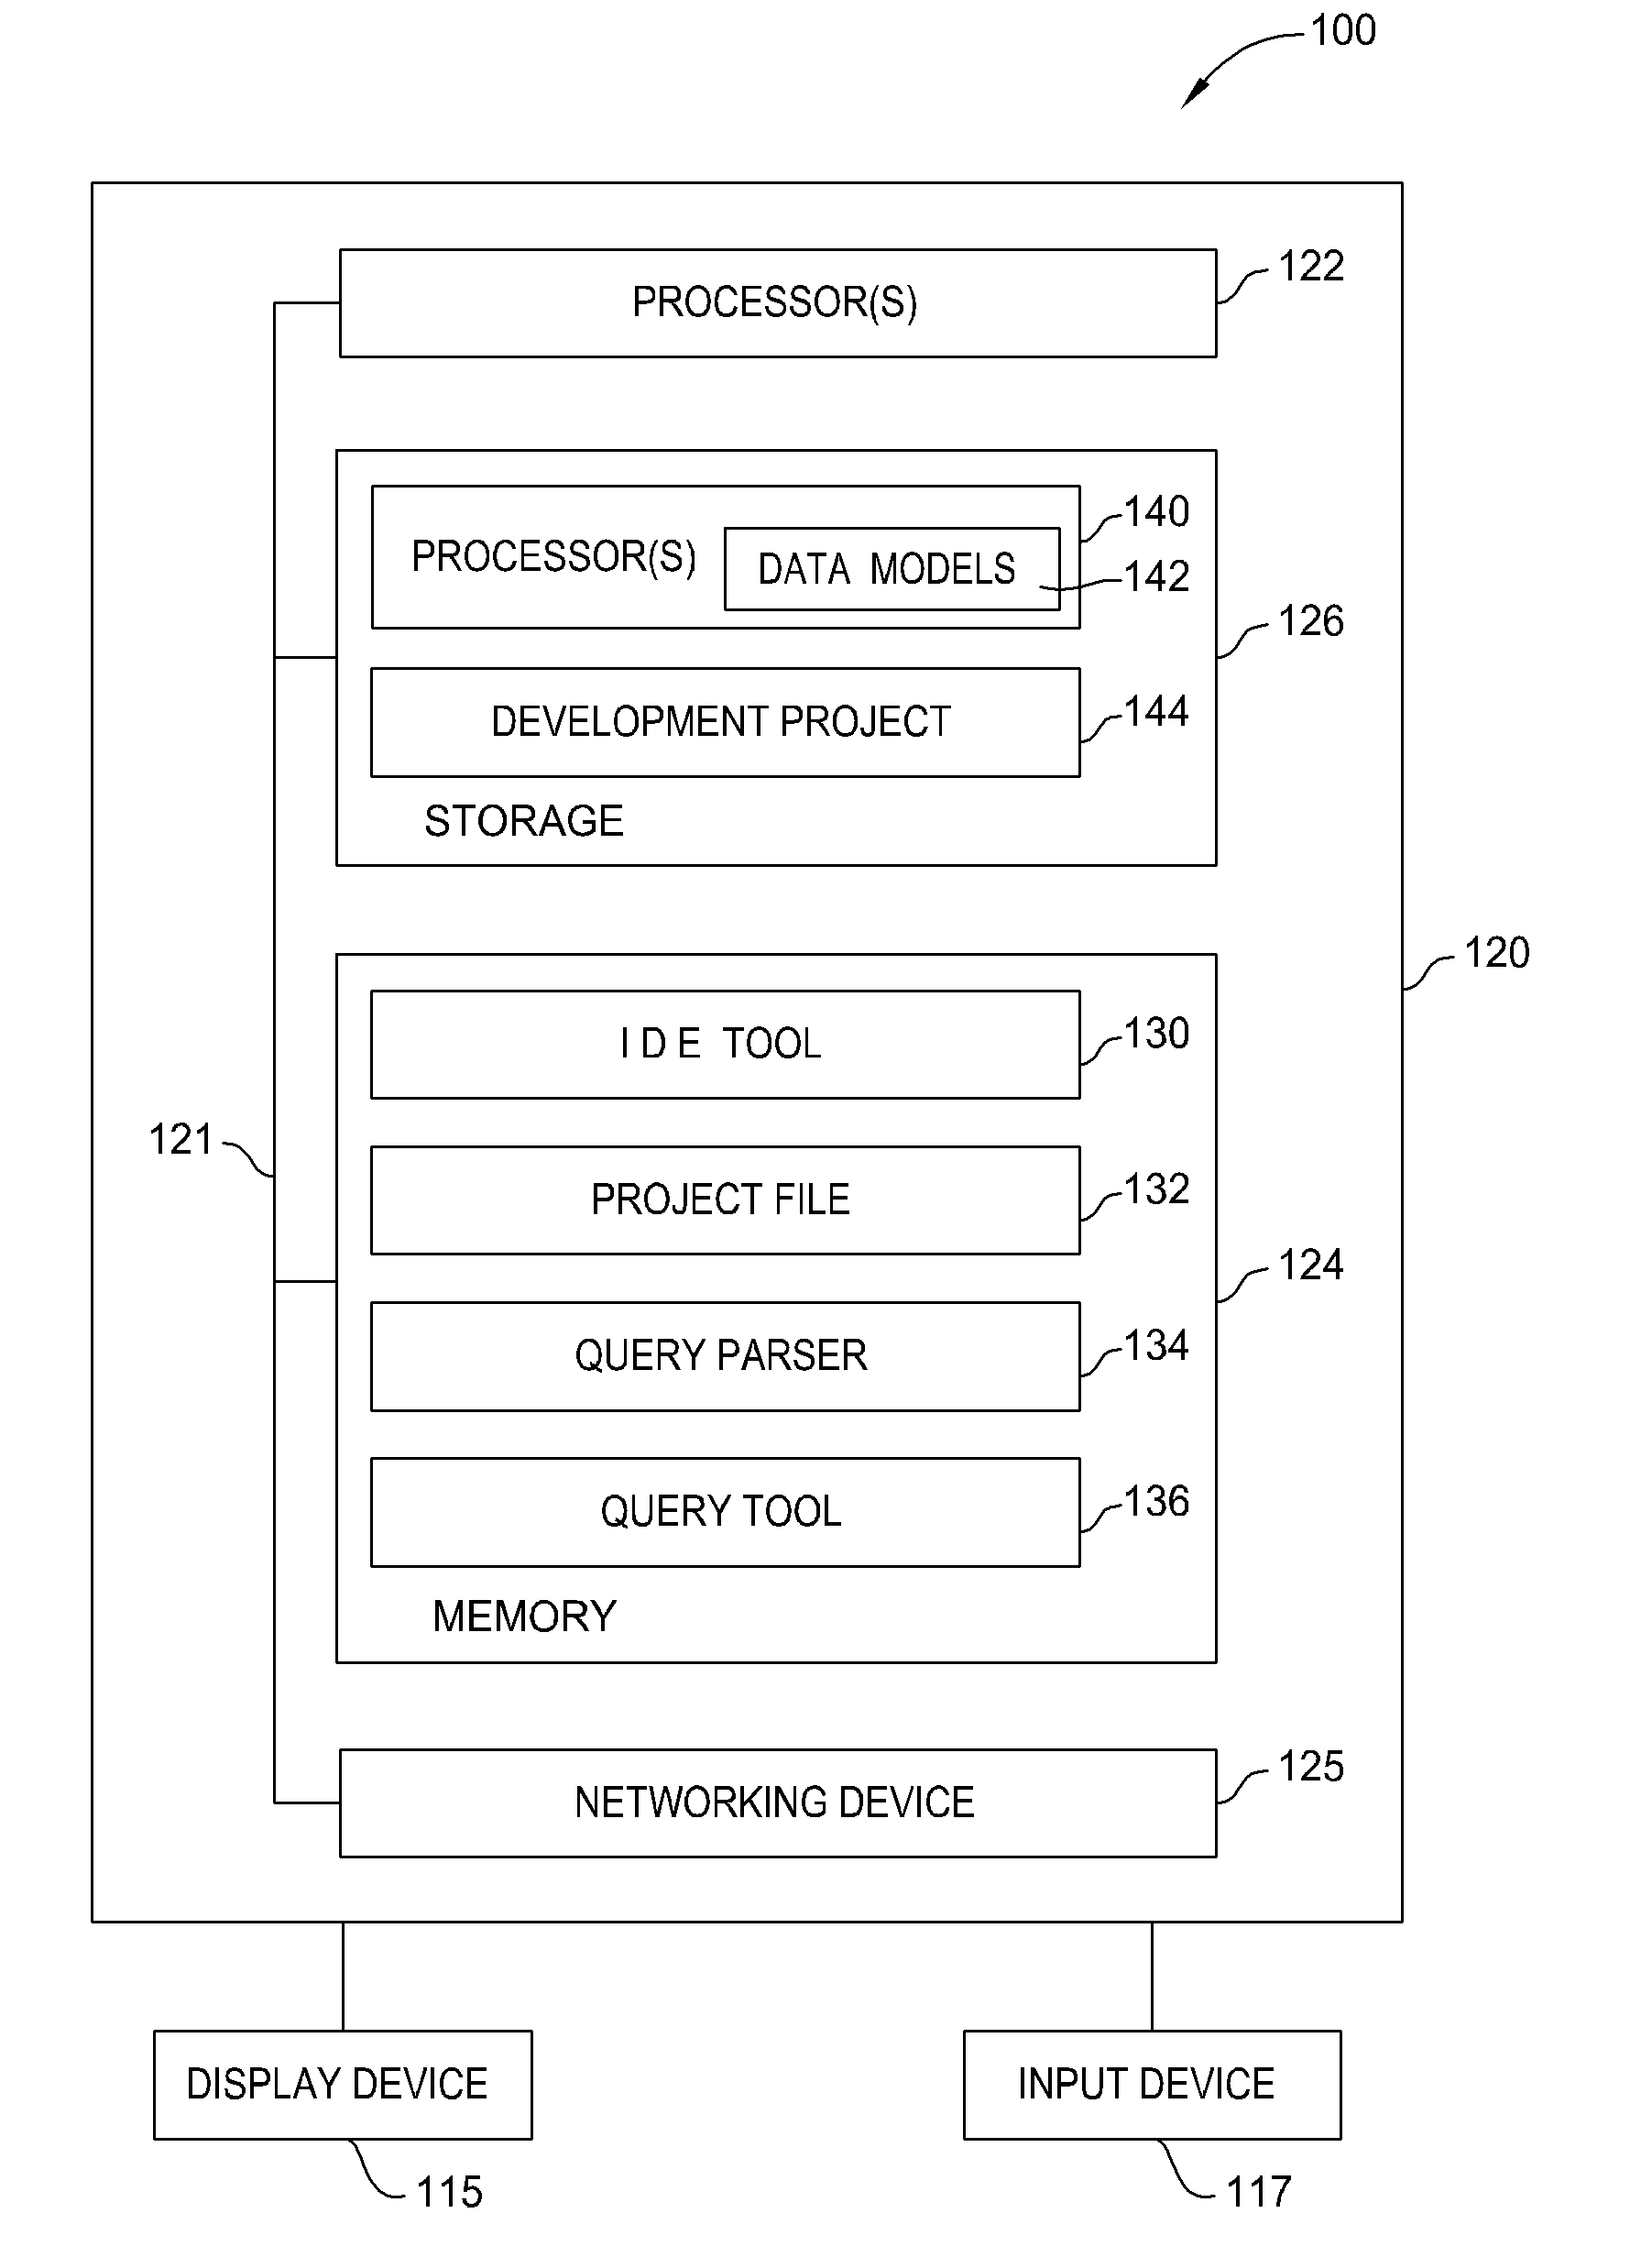 Database connectivity and database model integration within integrated development environment tool